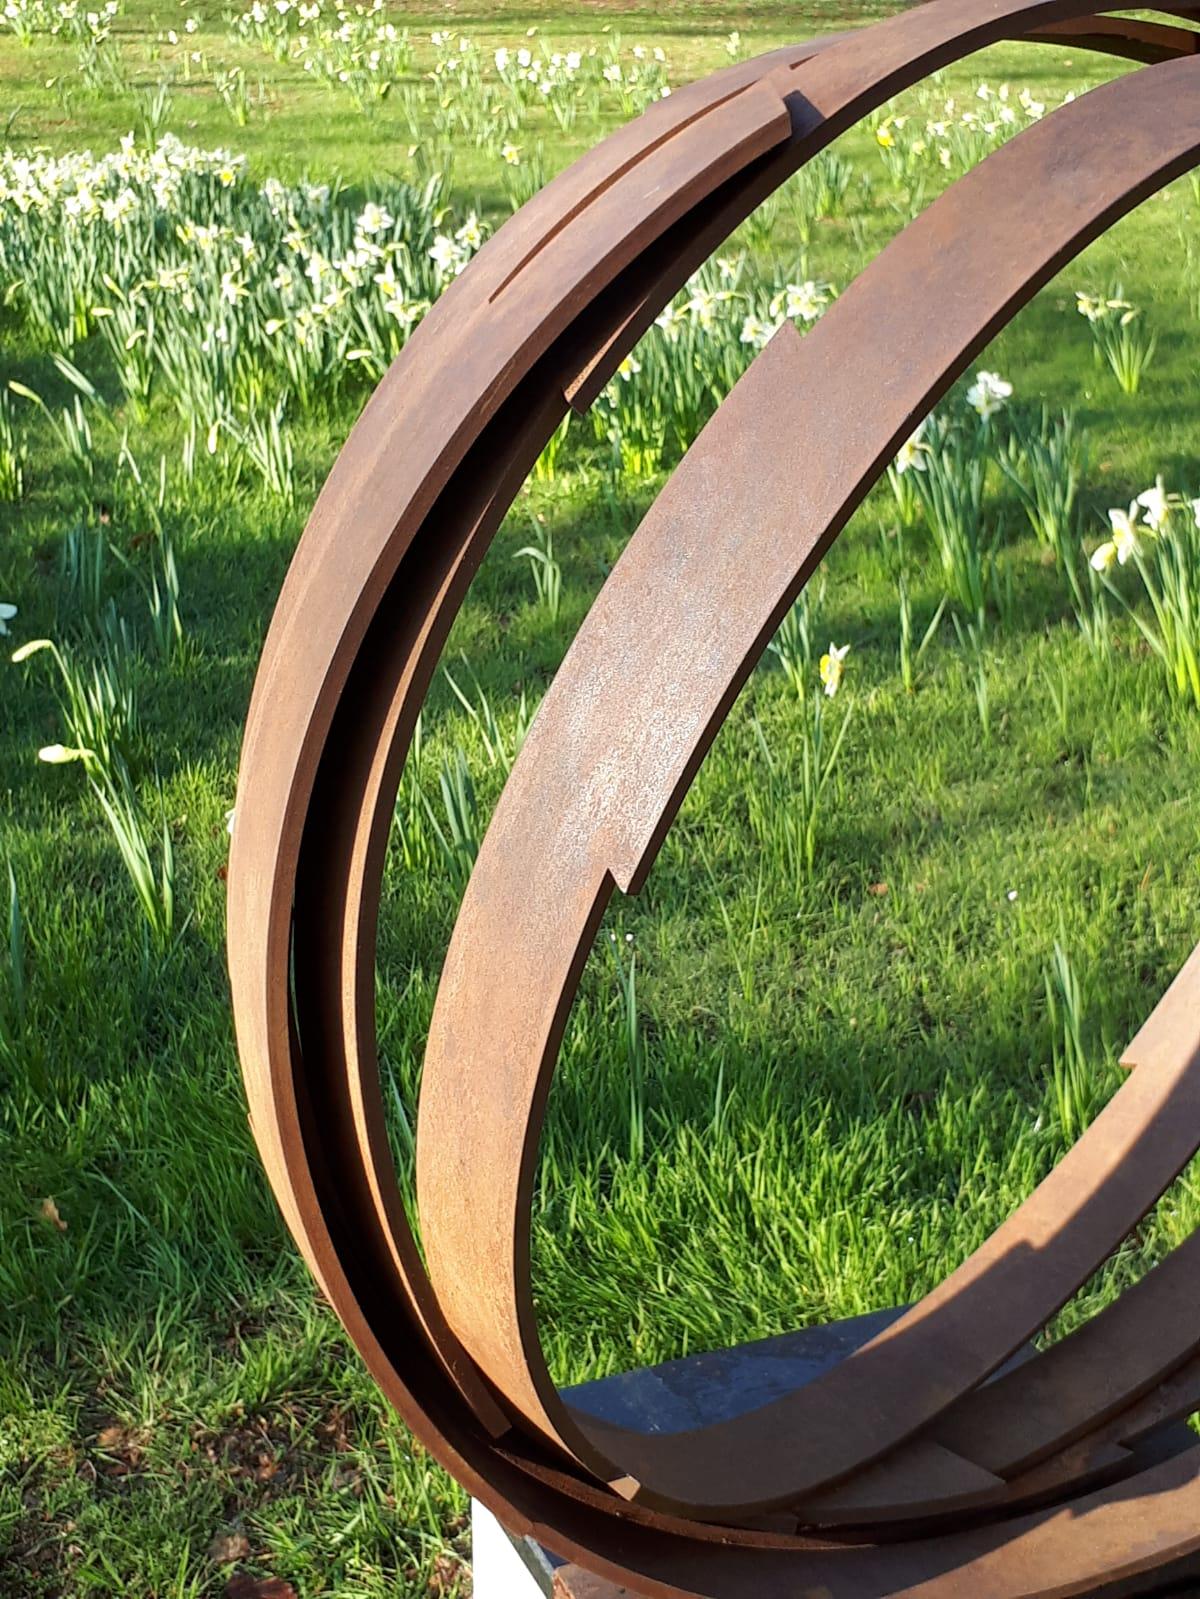 Large Orbit by Kuno Vollet - Contemporary Rusted Steel sculpture for Outdoors For Sale 9